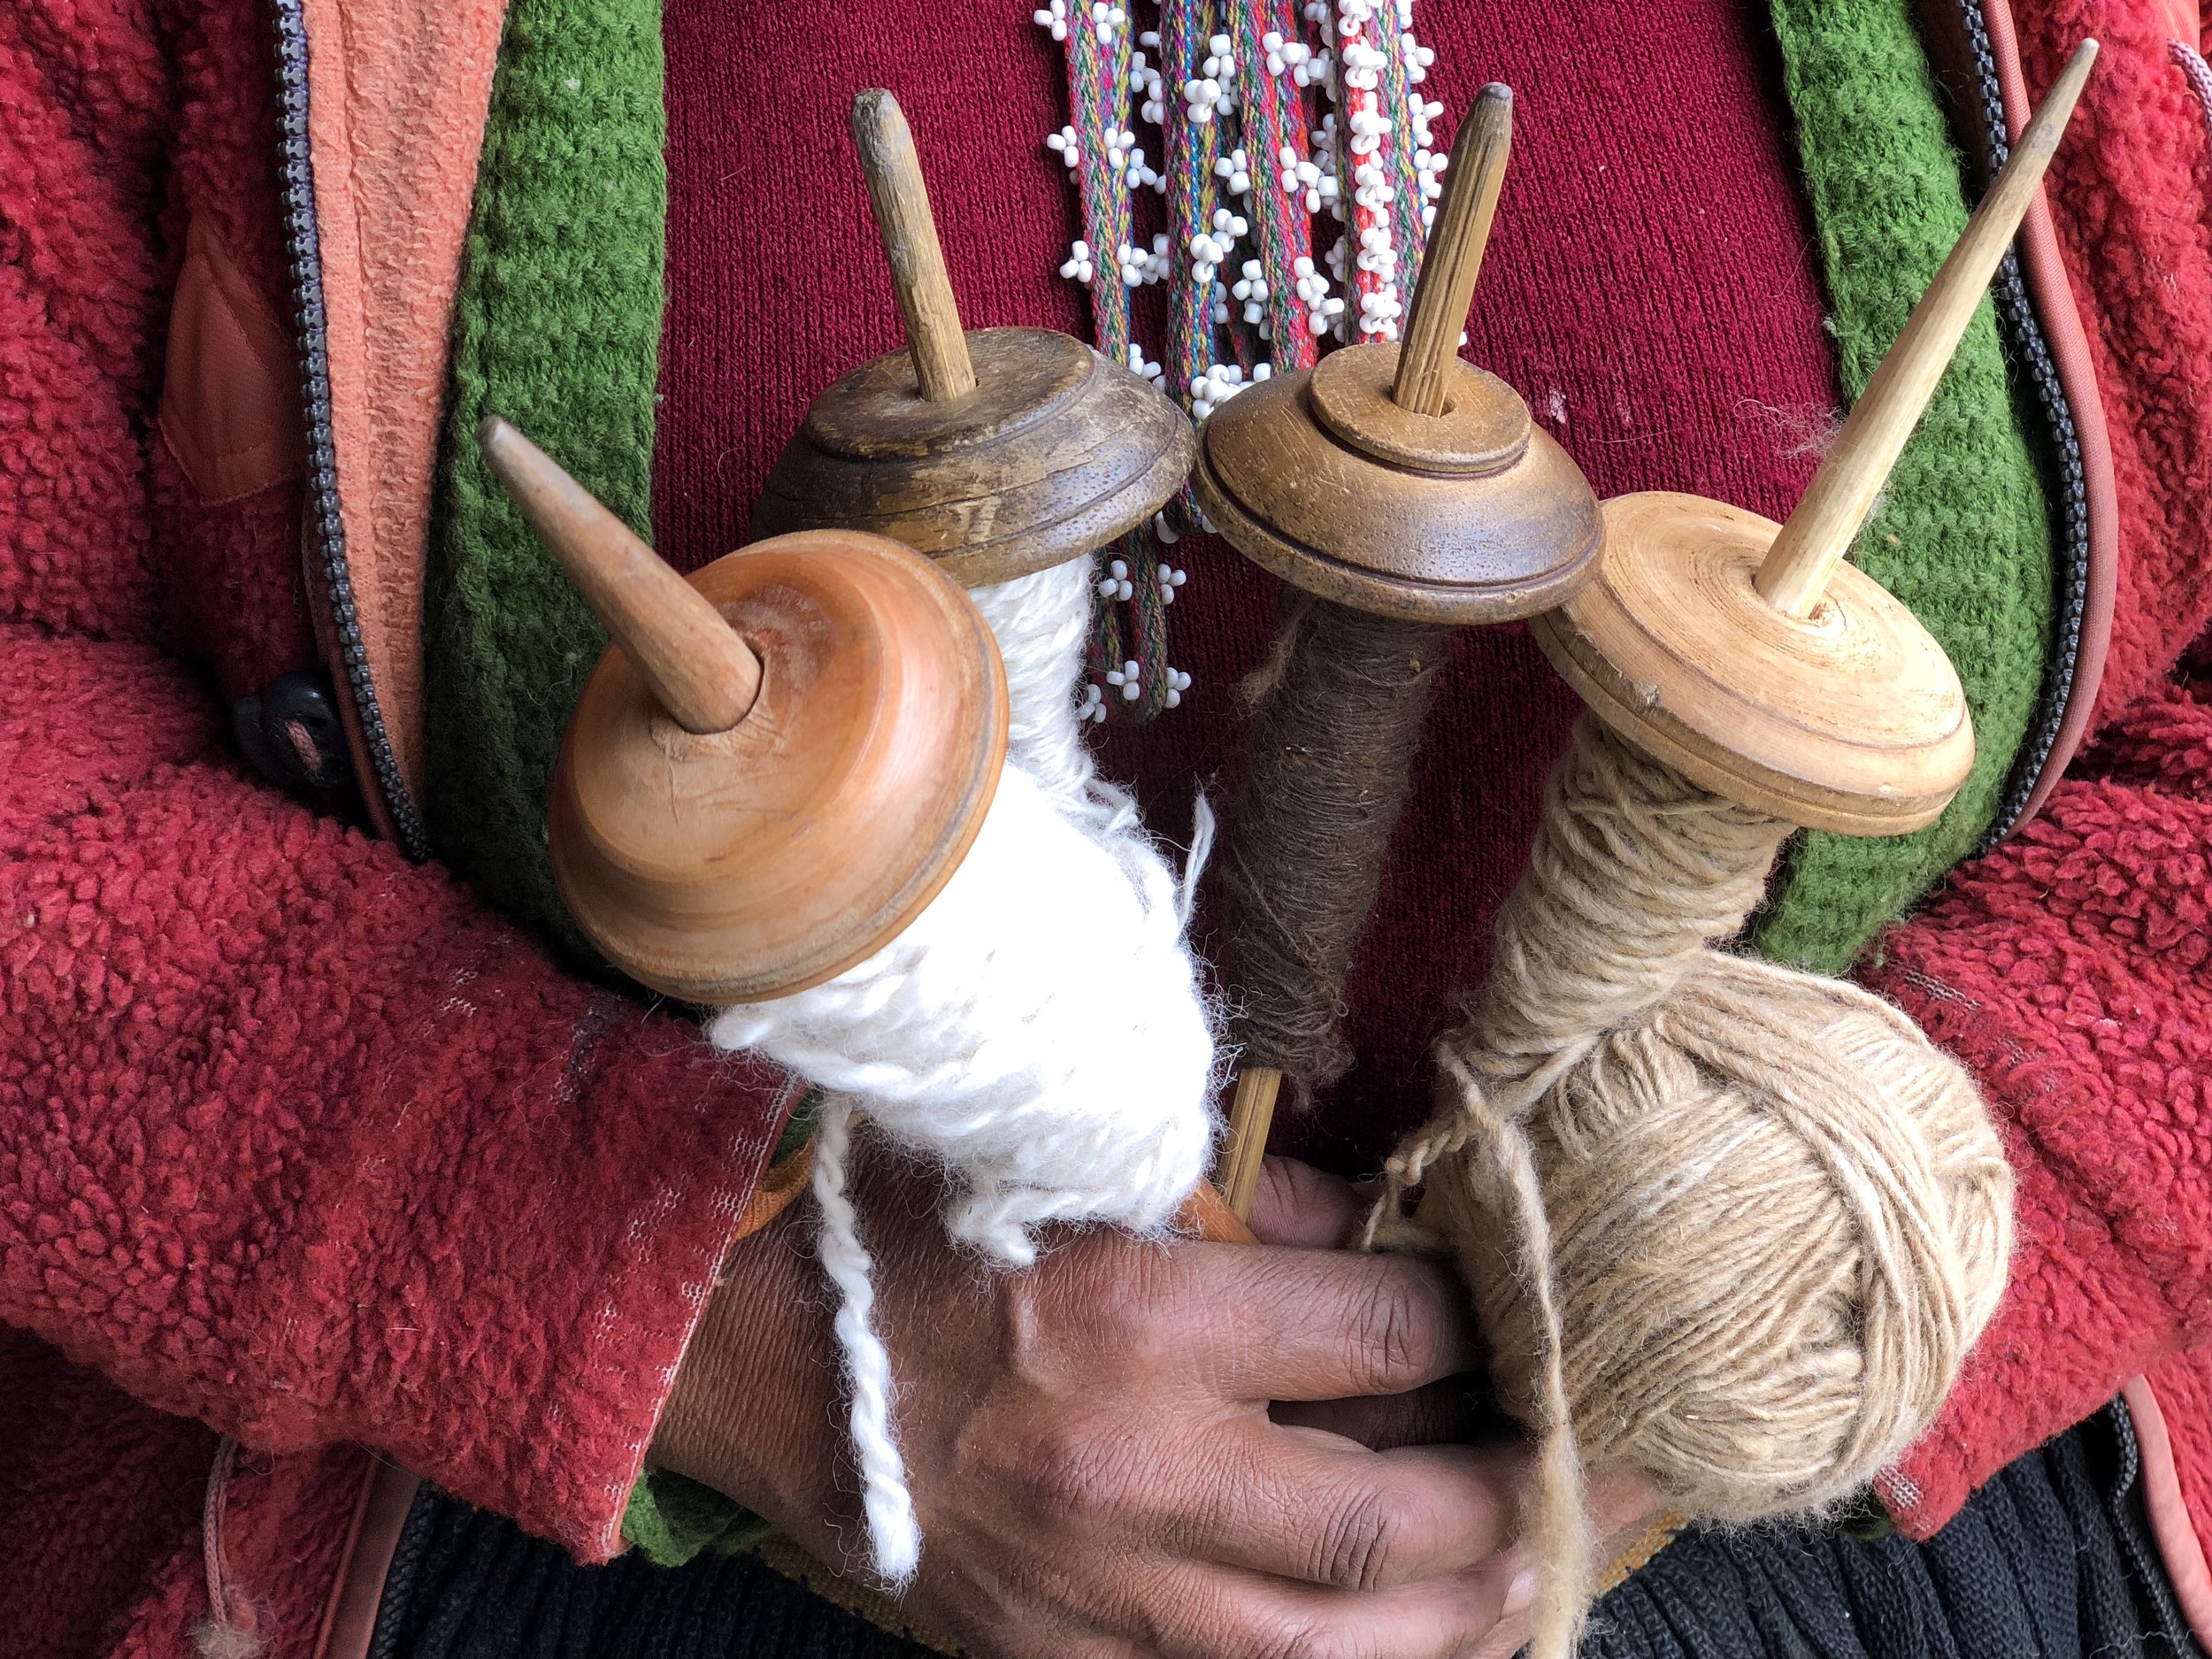 A tool called a puska, is used to spin the raw fiber into yarn.